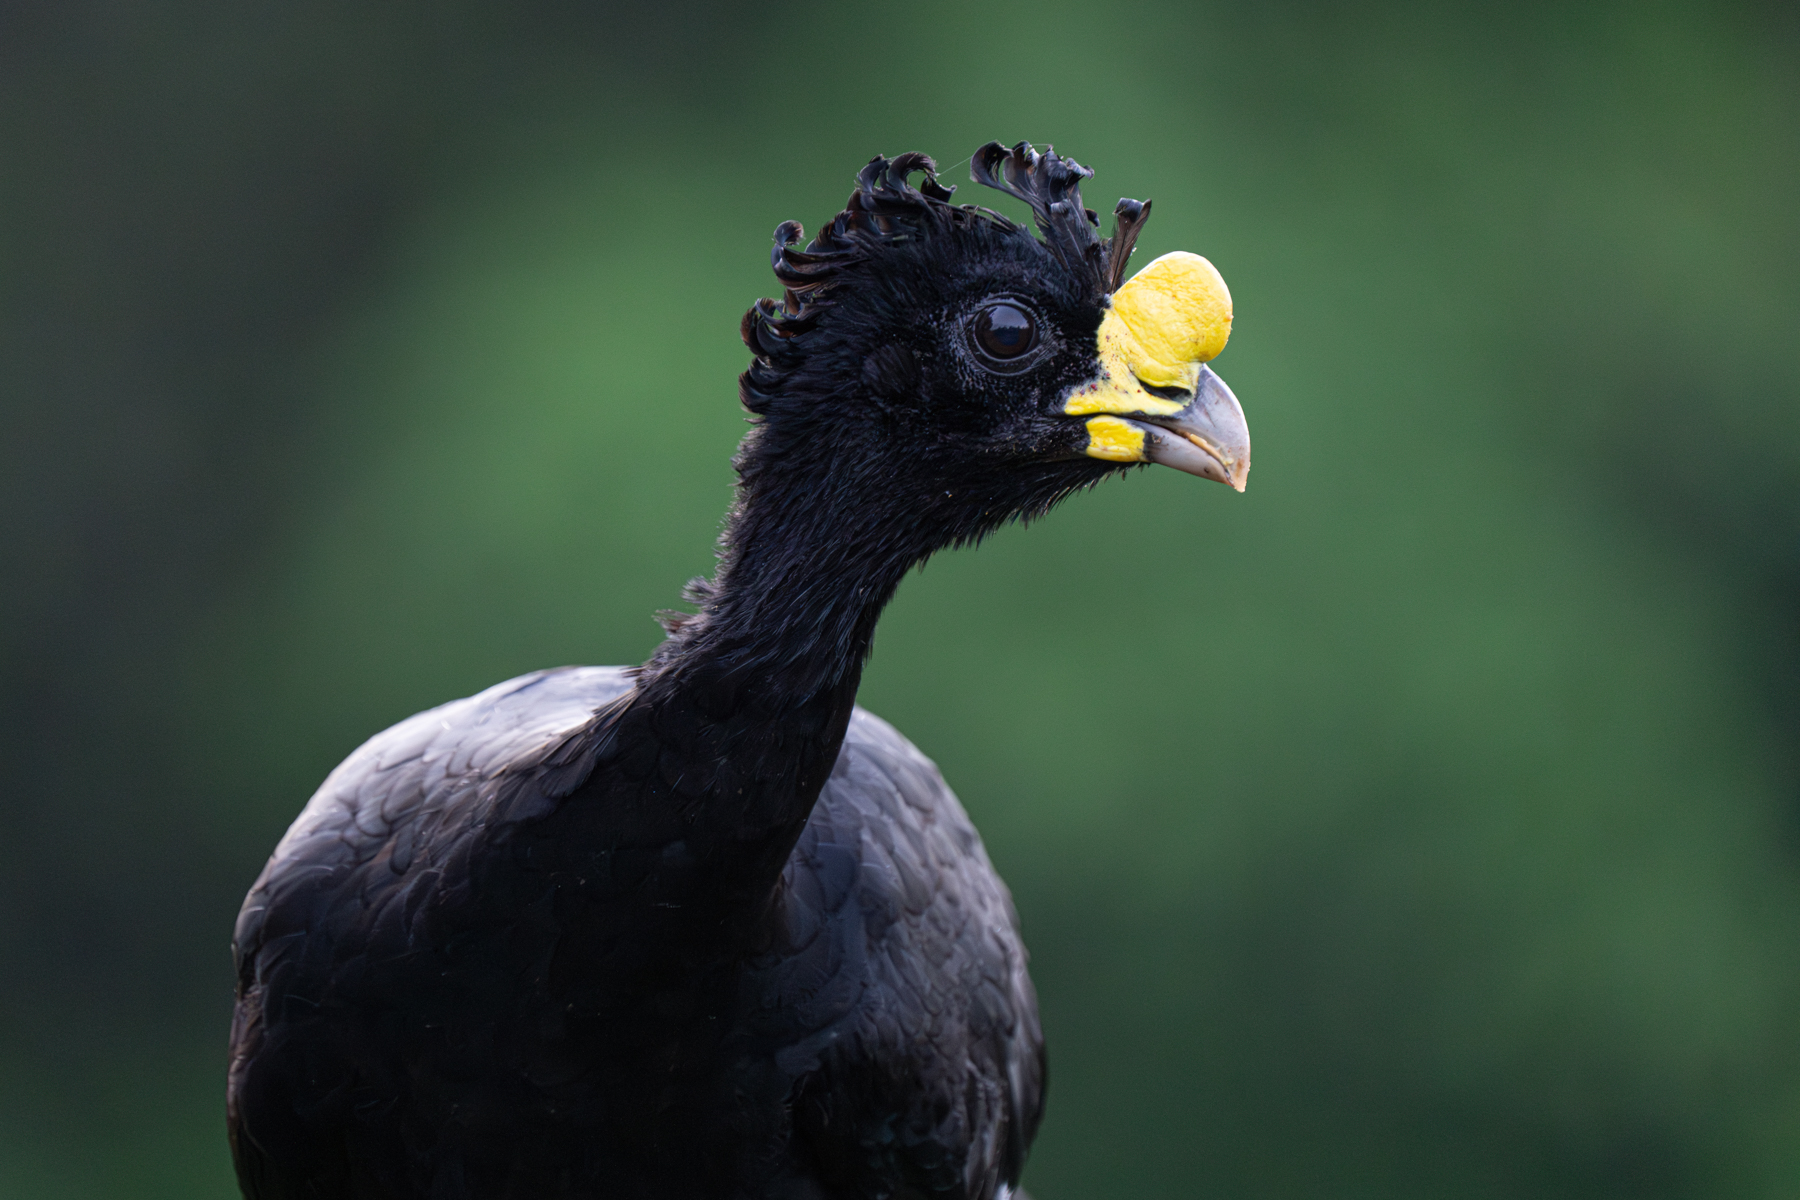 Portrait of a male Great Curassow (image by Inger Vandyke)